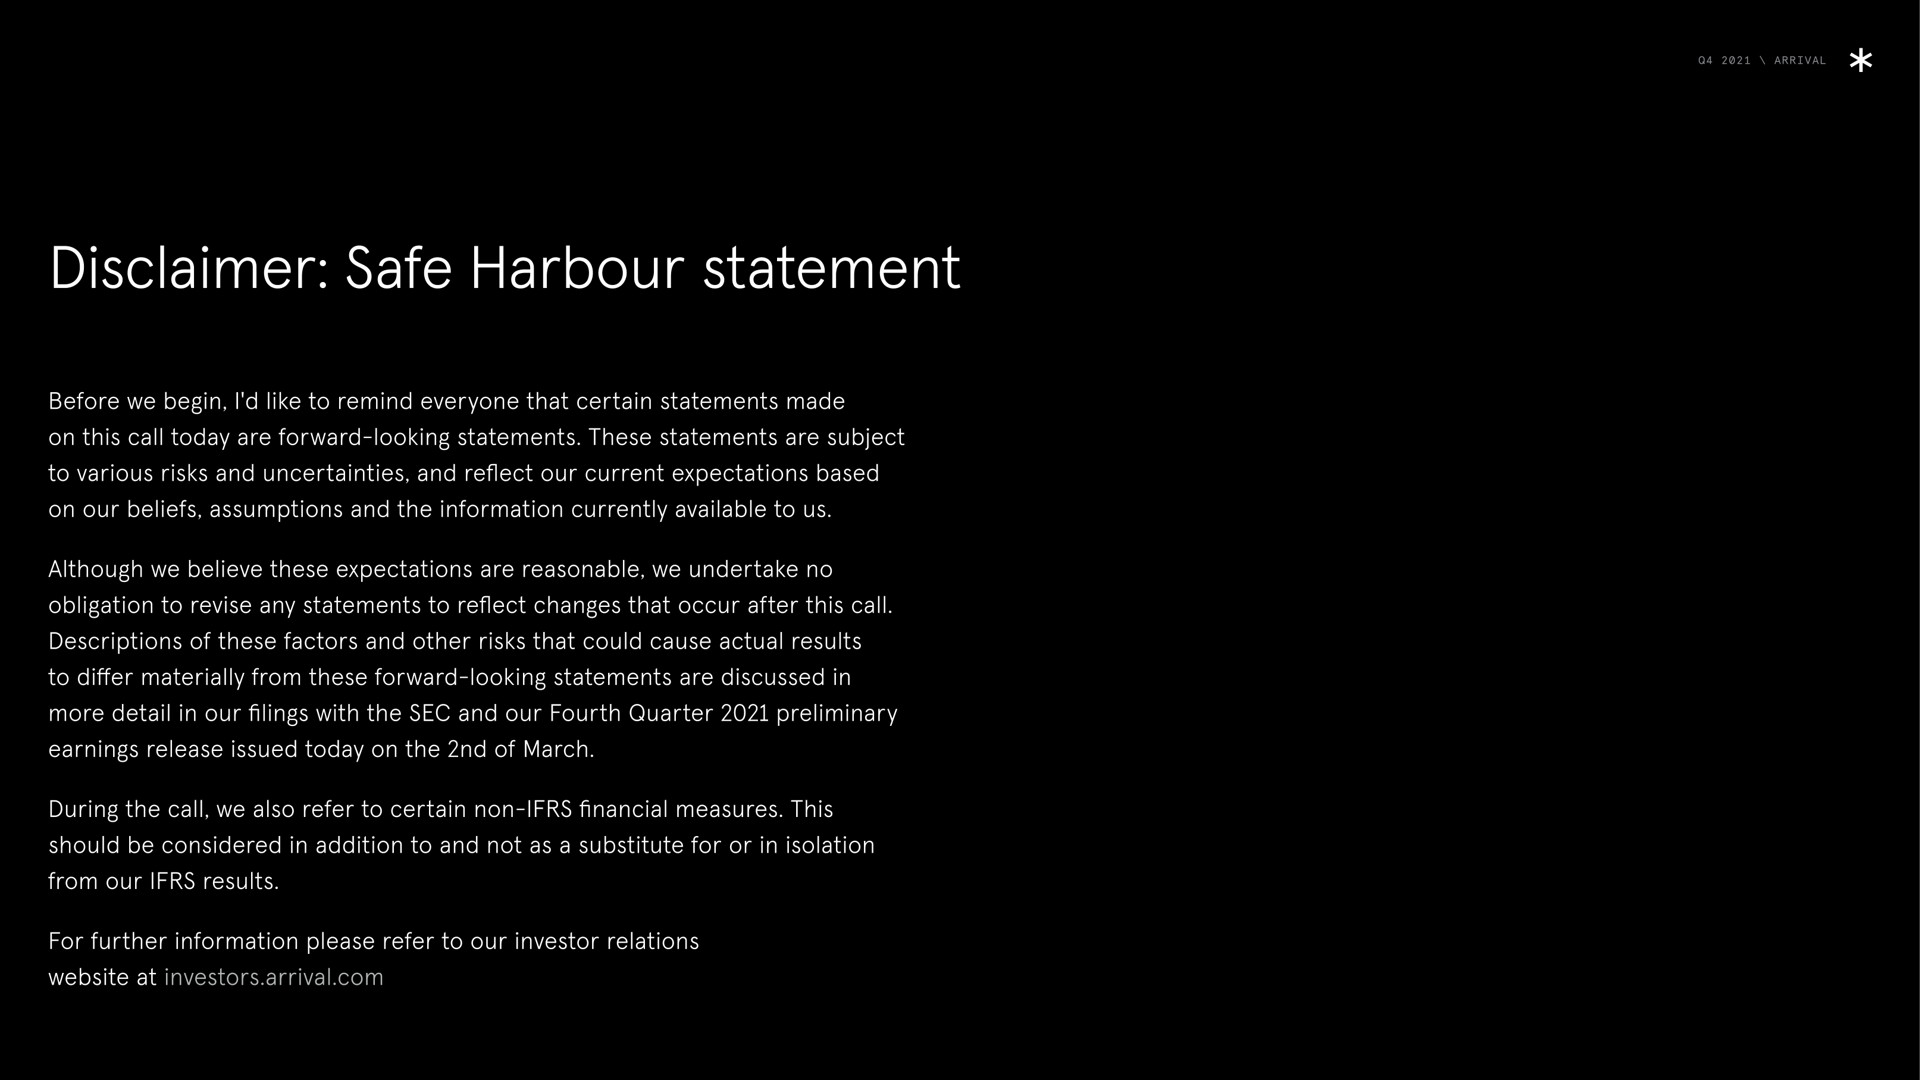 arrival disclaimer safe harbour statement before we begin i like to remind everyone that certain statements made on this call today are forward looking statements these statements are subject to various risks and uncertainties and reflect our current expectations based on our beliefs assumptions and the information currently available to us although we believe these expectations are reasonable we undertake no obligation to revise any statements to reflect changes that occur after this call descriptions of these factors and other risks that could cause actual results to differ materially from these forward looking statements are discussed in more detail in our filings with the sec and our fourth quarter preliminary earnings release issued today on the of march during the call we also refer to certain non financial measures this should be considered in addition to and not as a substitute for or in isolation from our results for further information please refer to our investor relations at investors arrival ware | Arrival